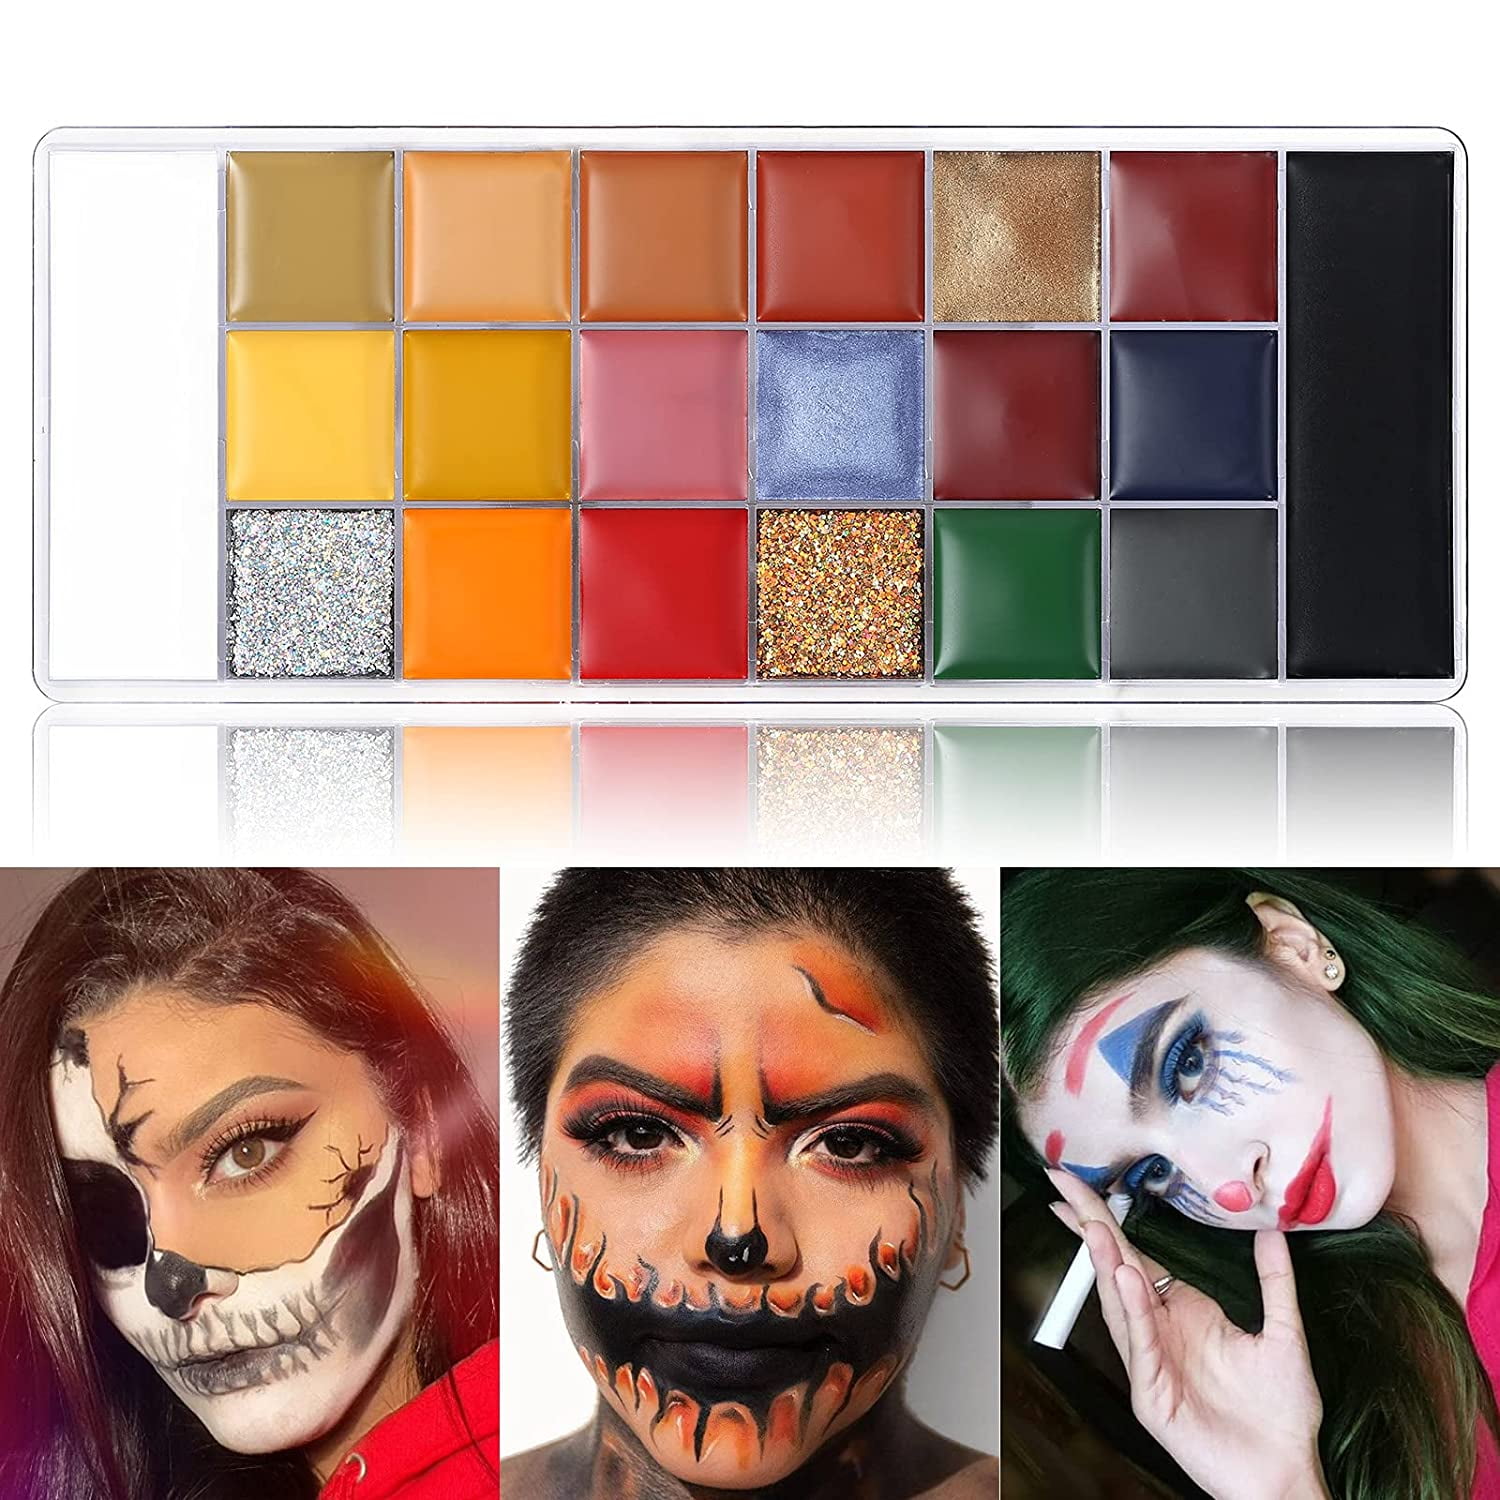 Athena painting palette I love it so much#colorfulmakeup #facepainting